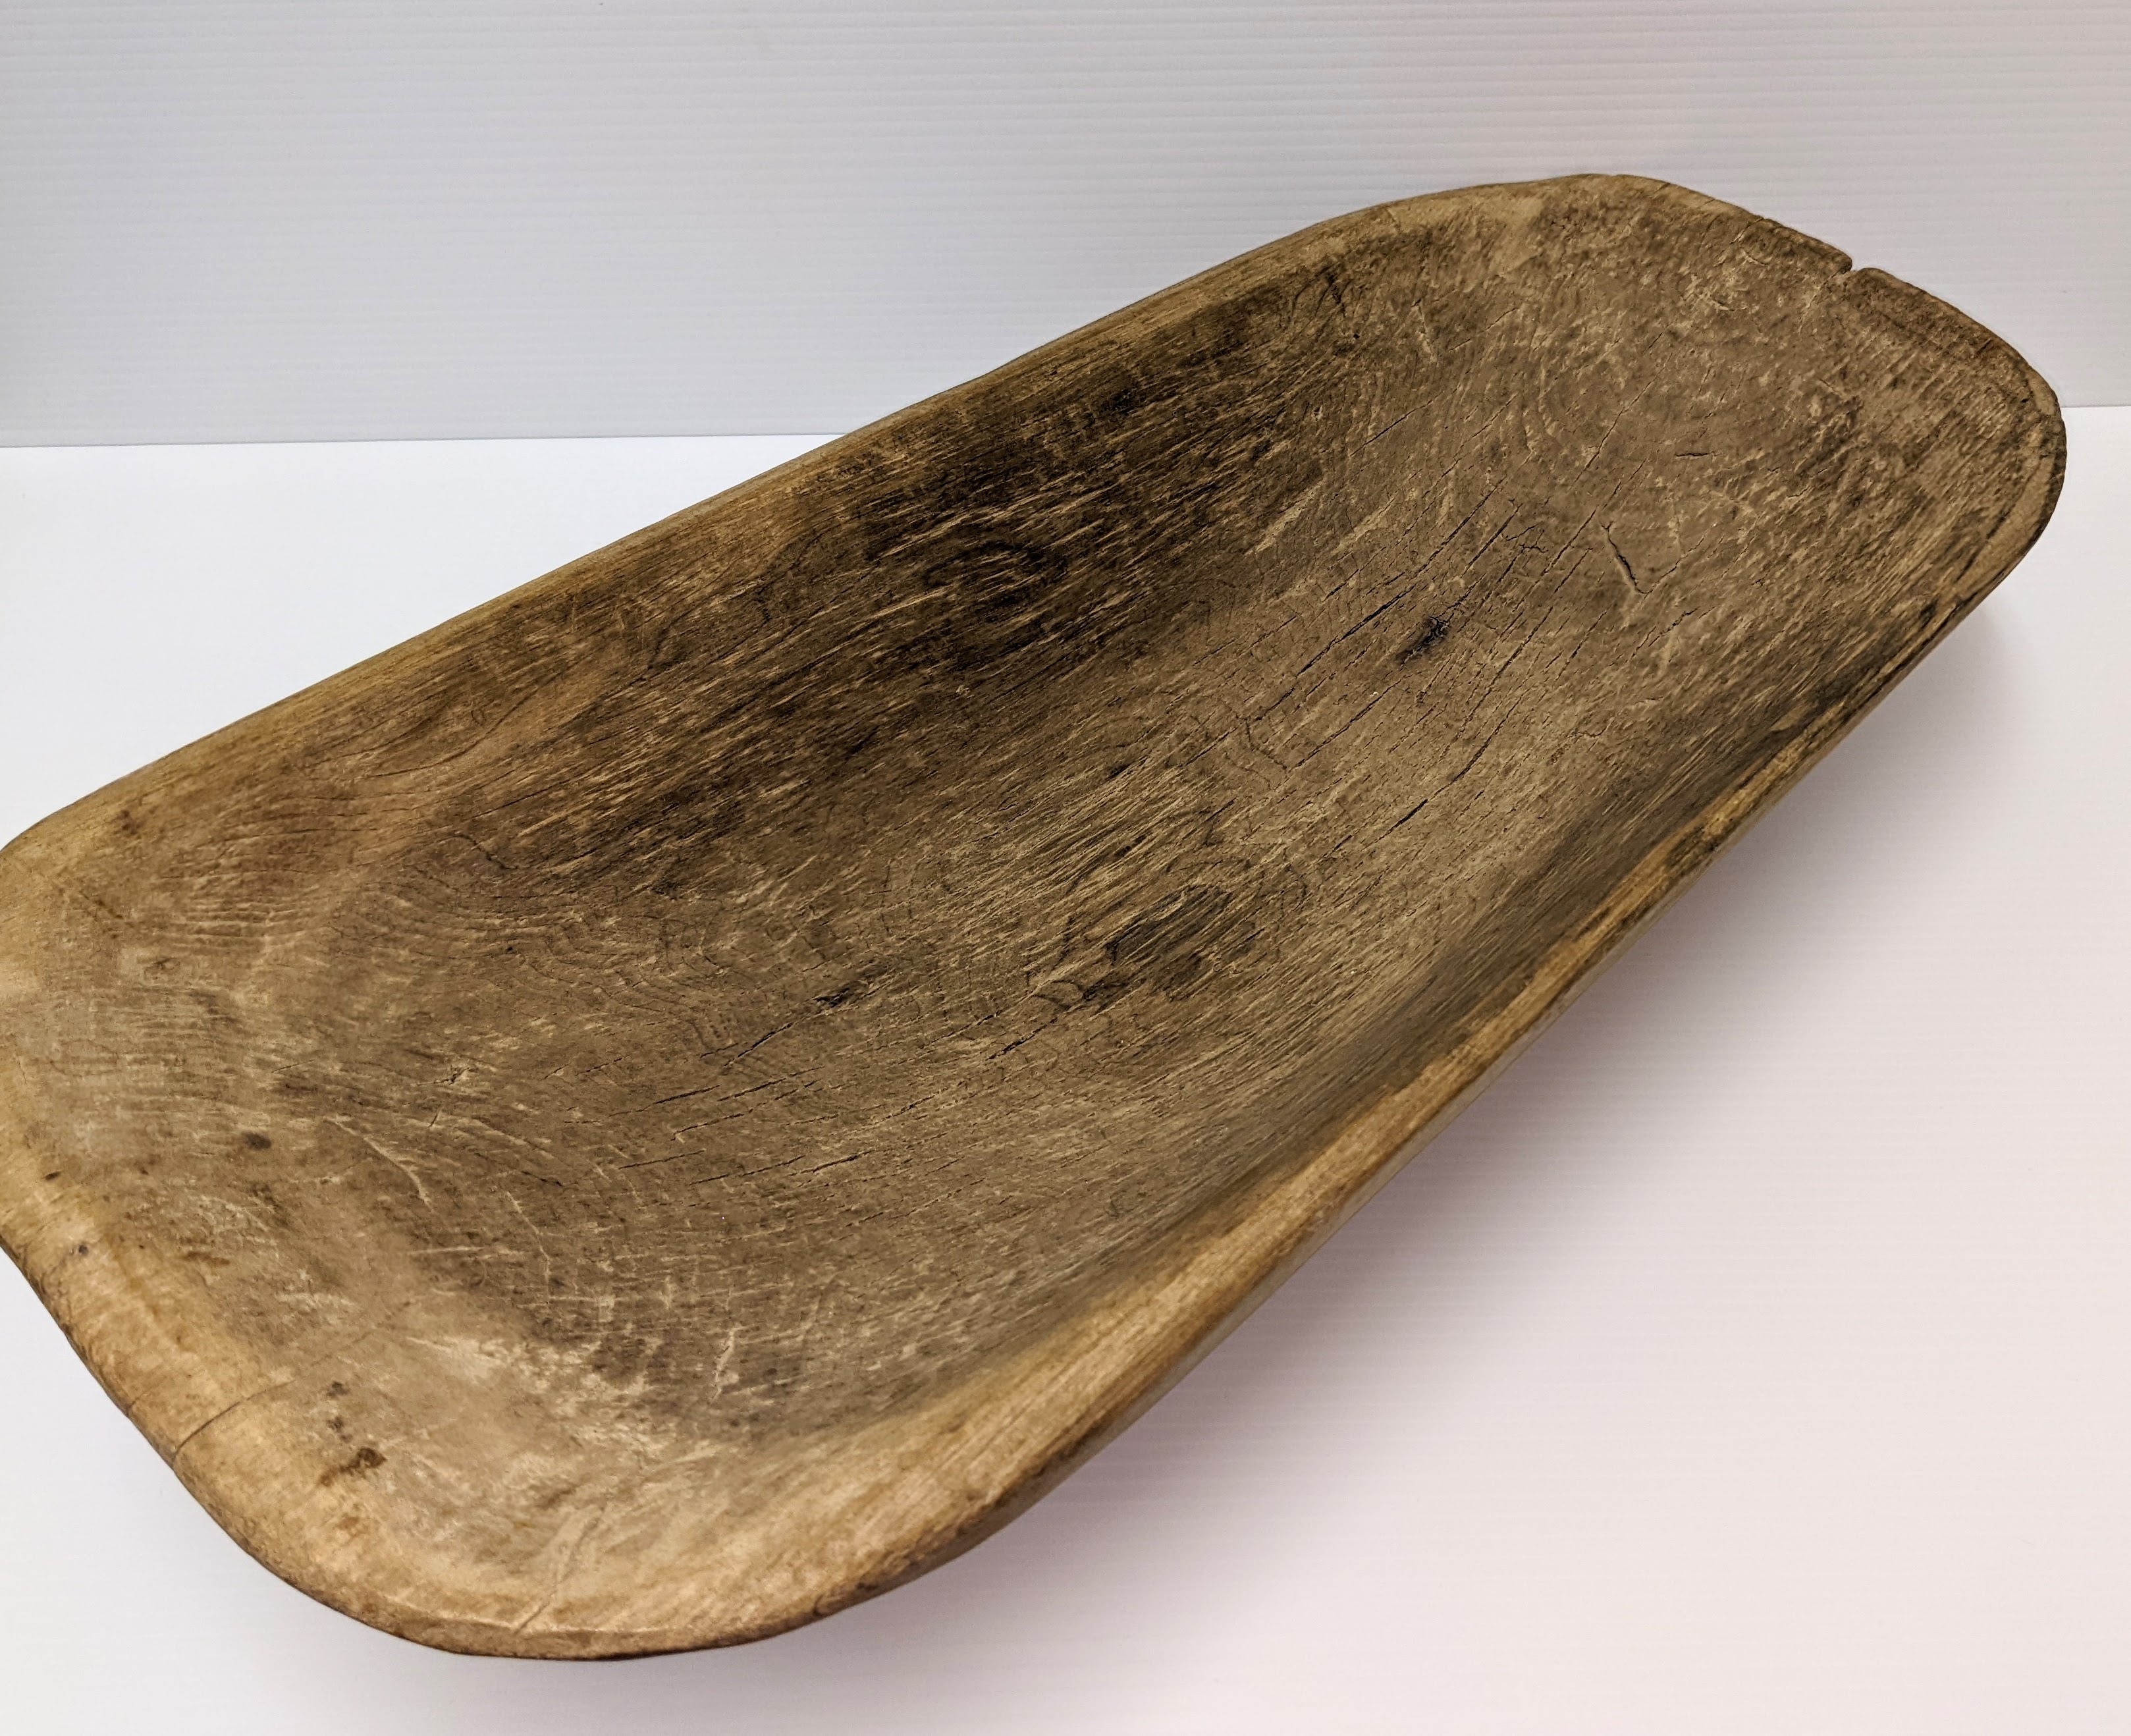 This large wooden bowl is labelled as a babies bathtub. It is 'dug-out' in style meaning it once was a full log that has been carved into its bowl shape. Though we don't have an age of the artifact it's smooth surface and various markings indicate it is well used and washed many a child.
999.03.94 / Hitchcock, Eunice